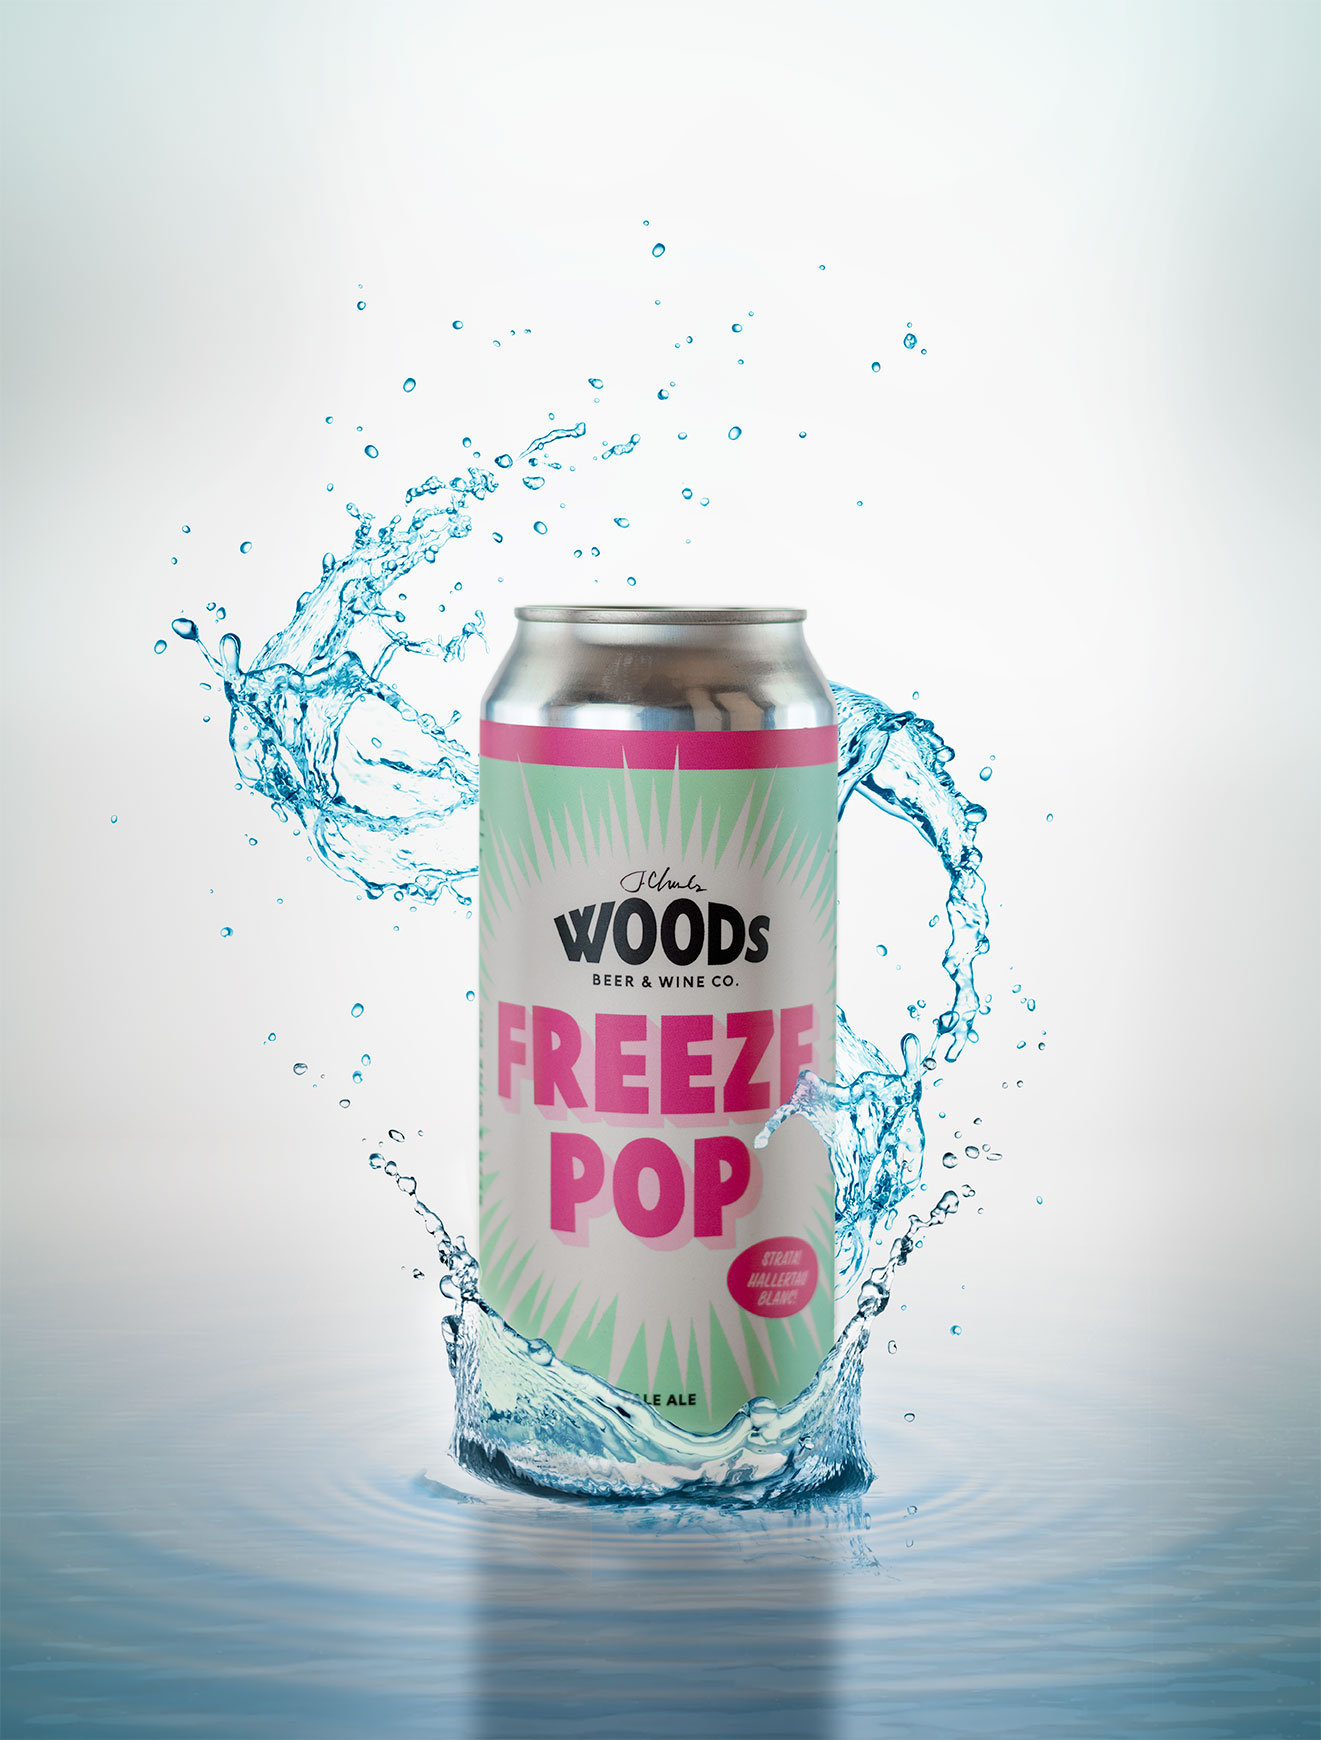 creative product photography - woods beer and wine splash image